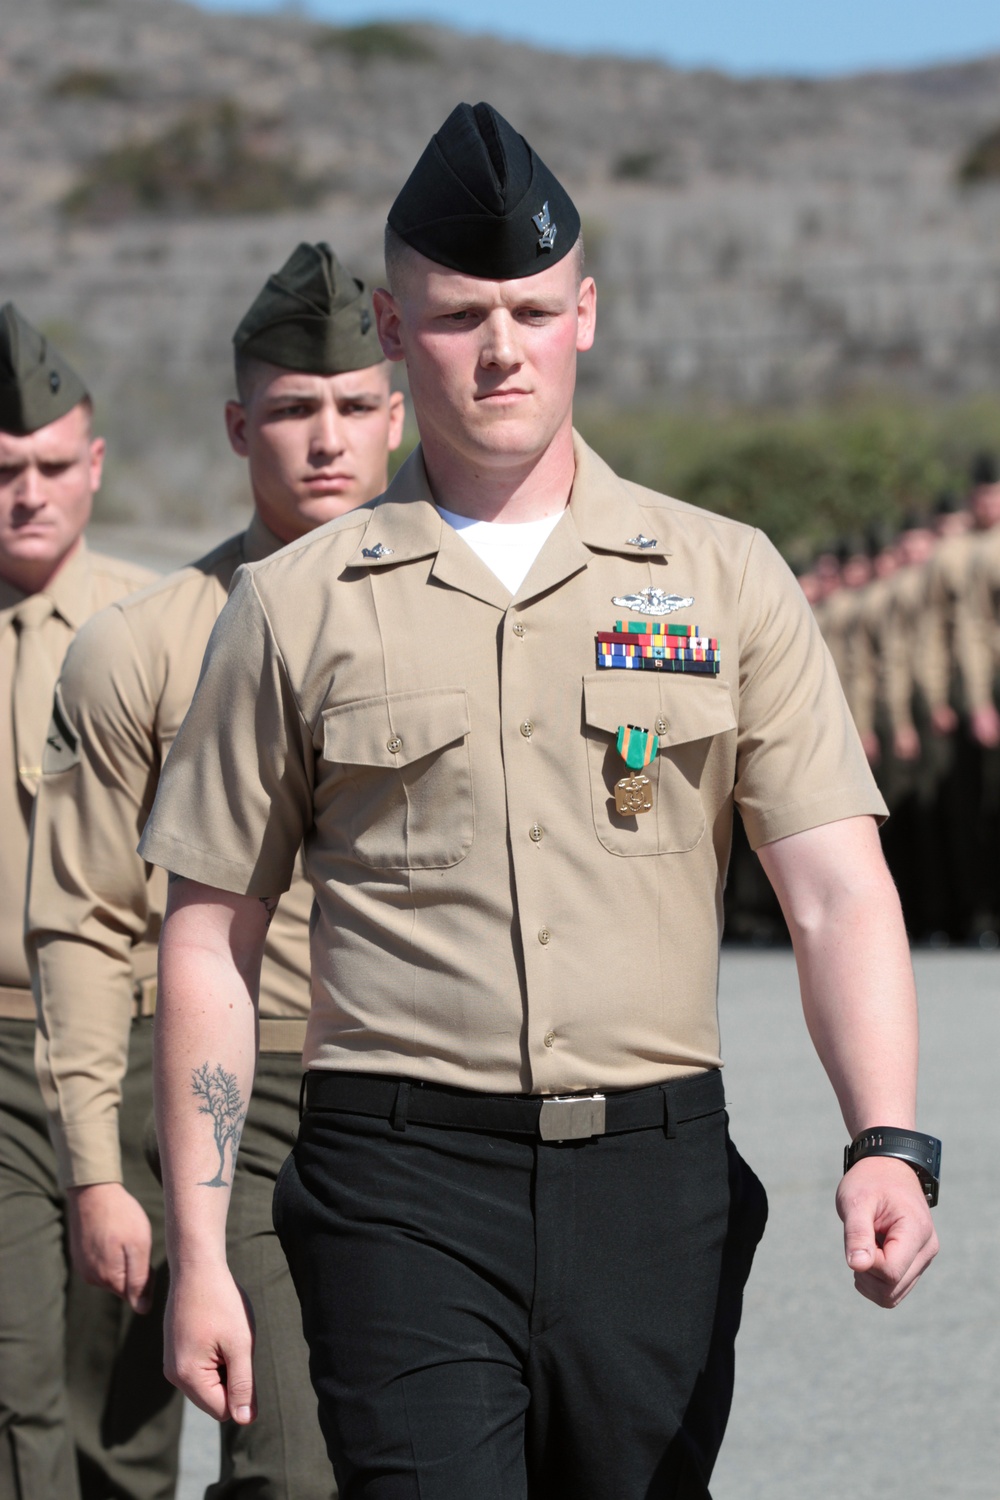 Grand Haven native, U.S. Navy corpsman awarded for excellence in U.S. Marine infantry battalion